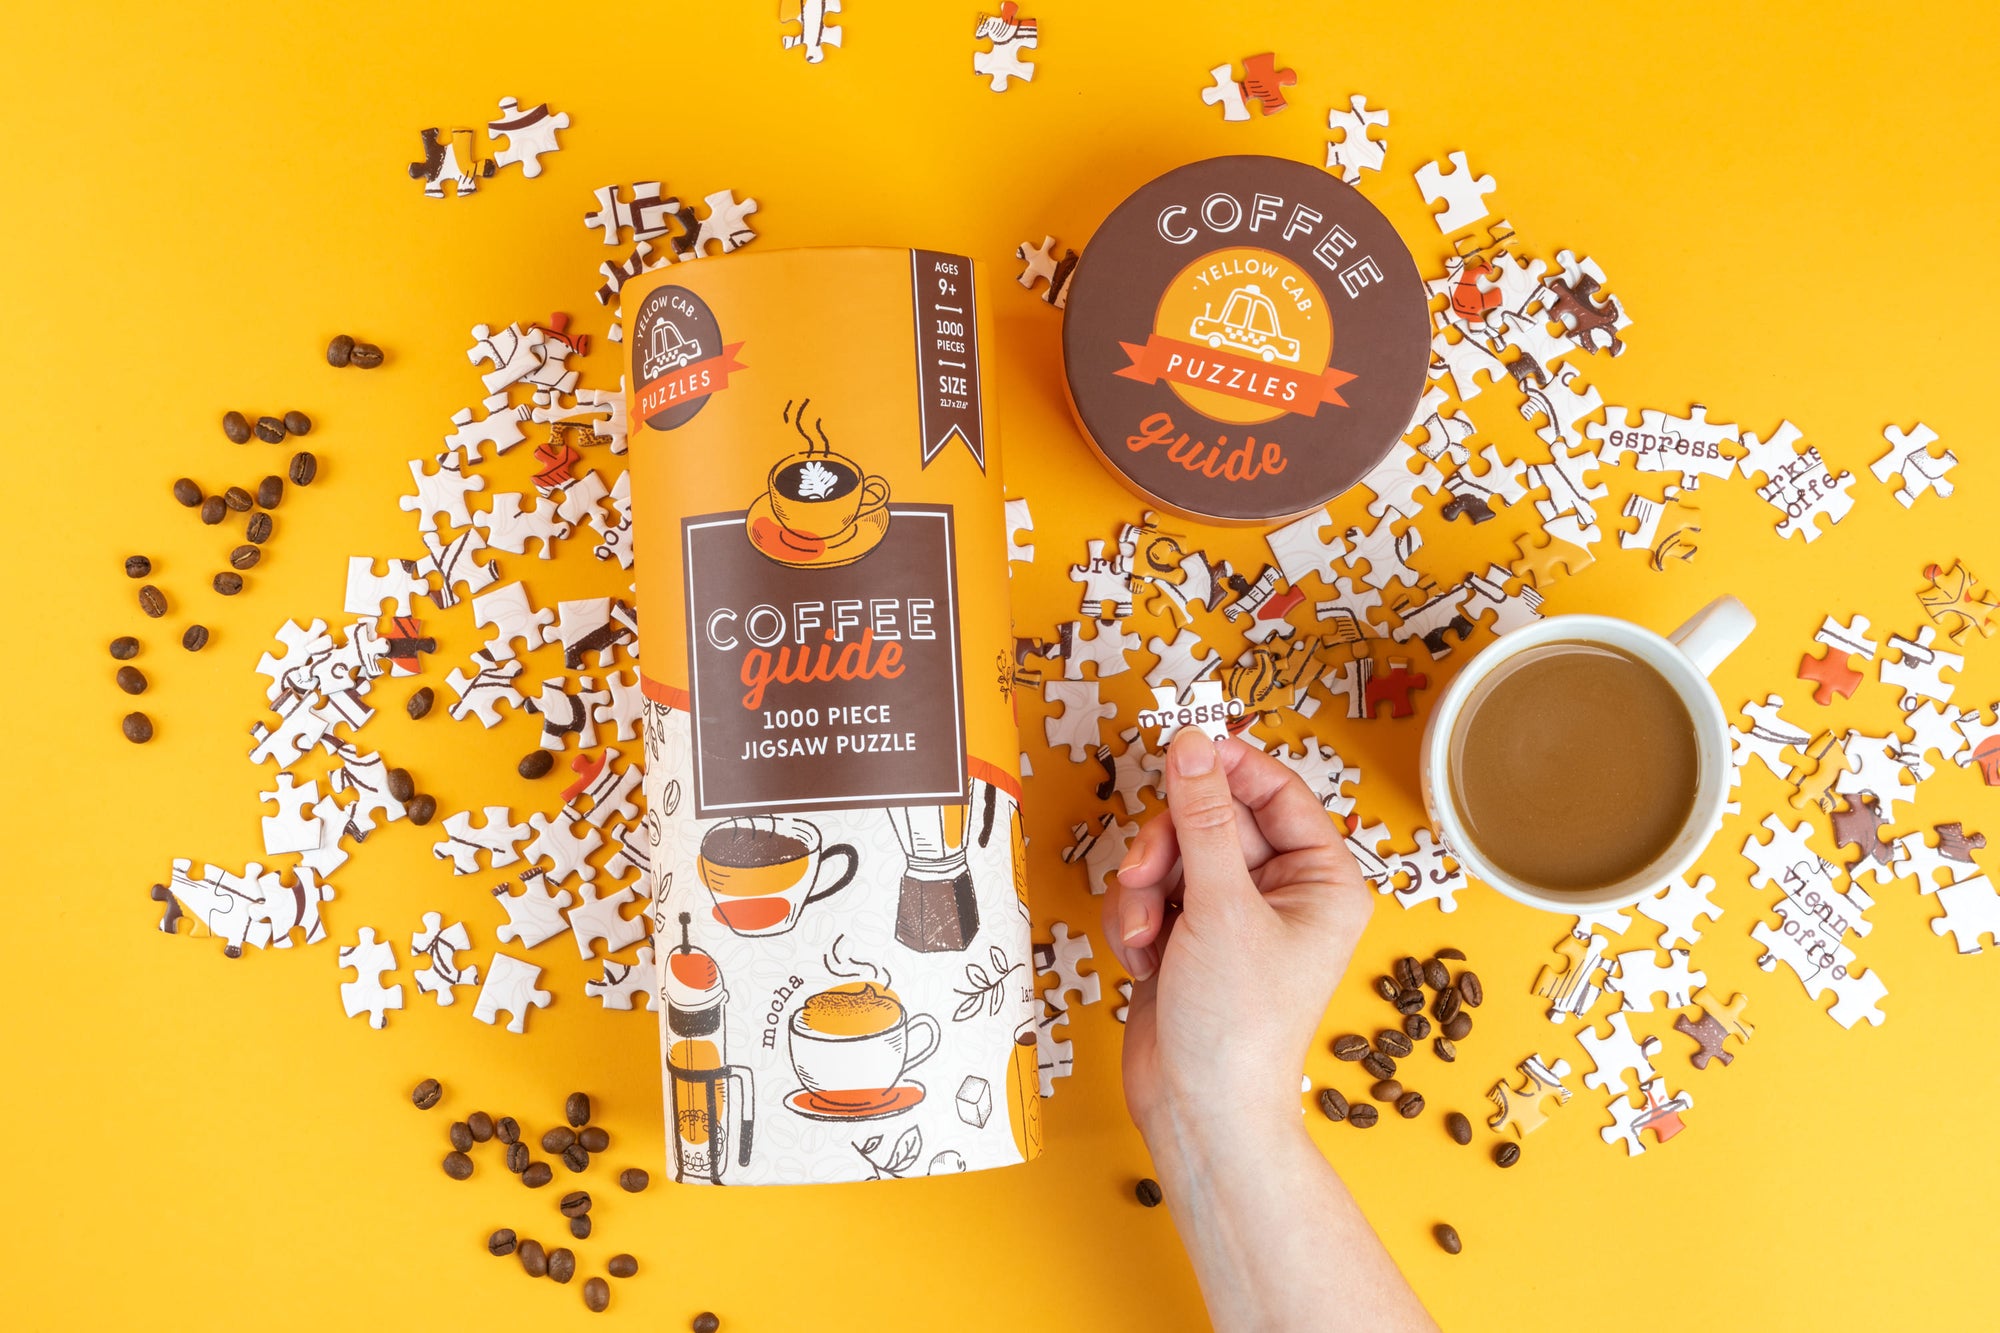 Coffee Guide Jigsaw Puzzle